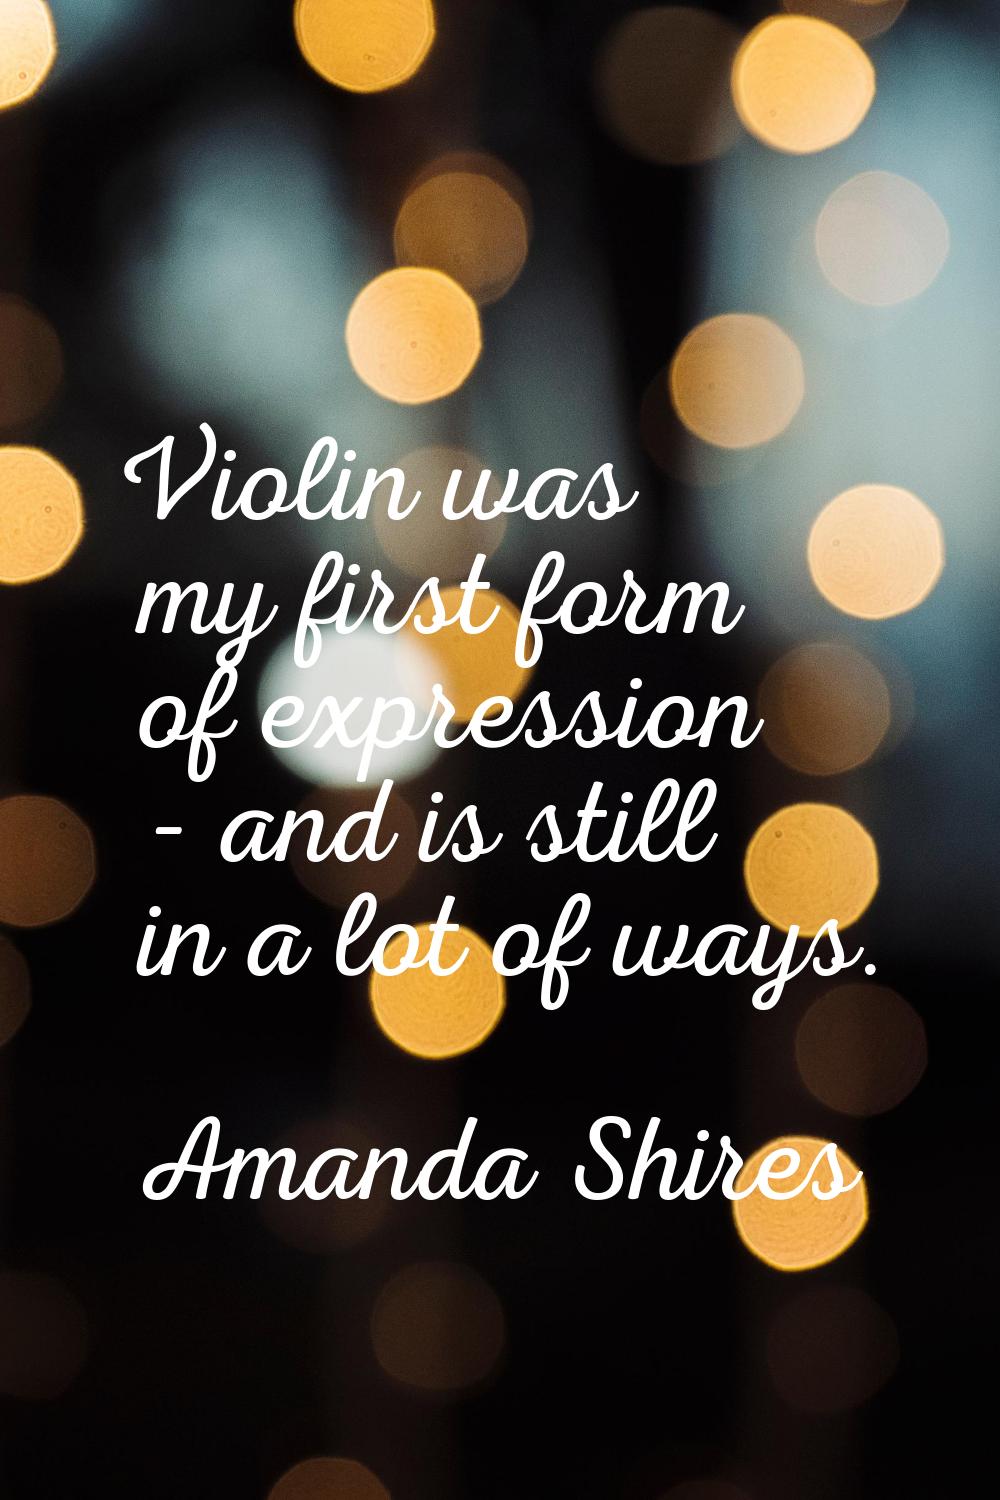 Violin was my first form of expression - and is still in a lot of ways.